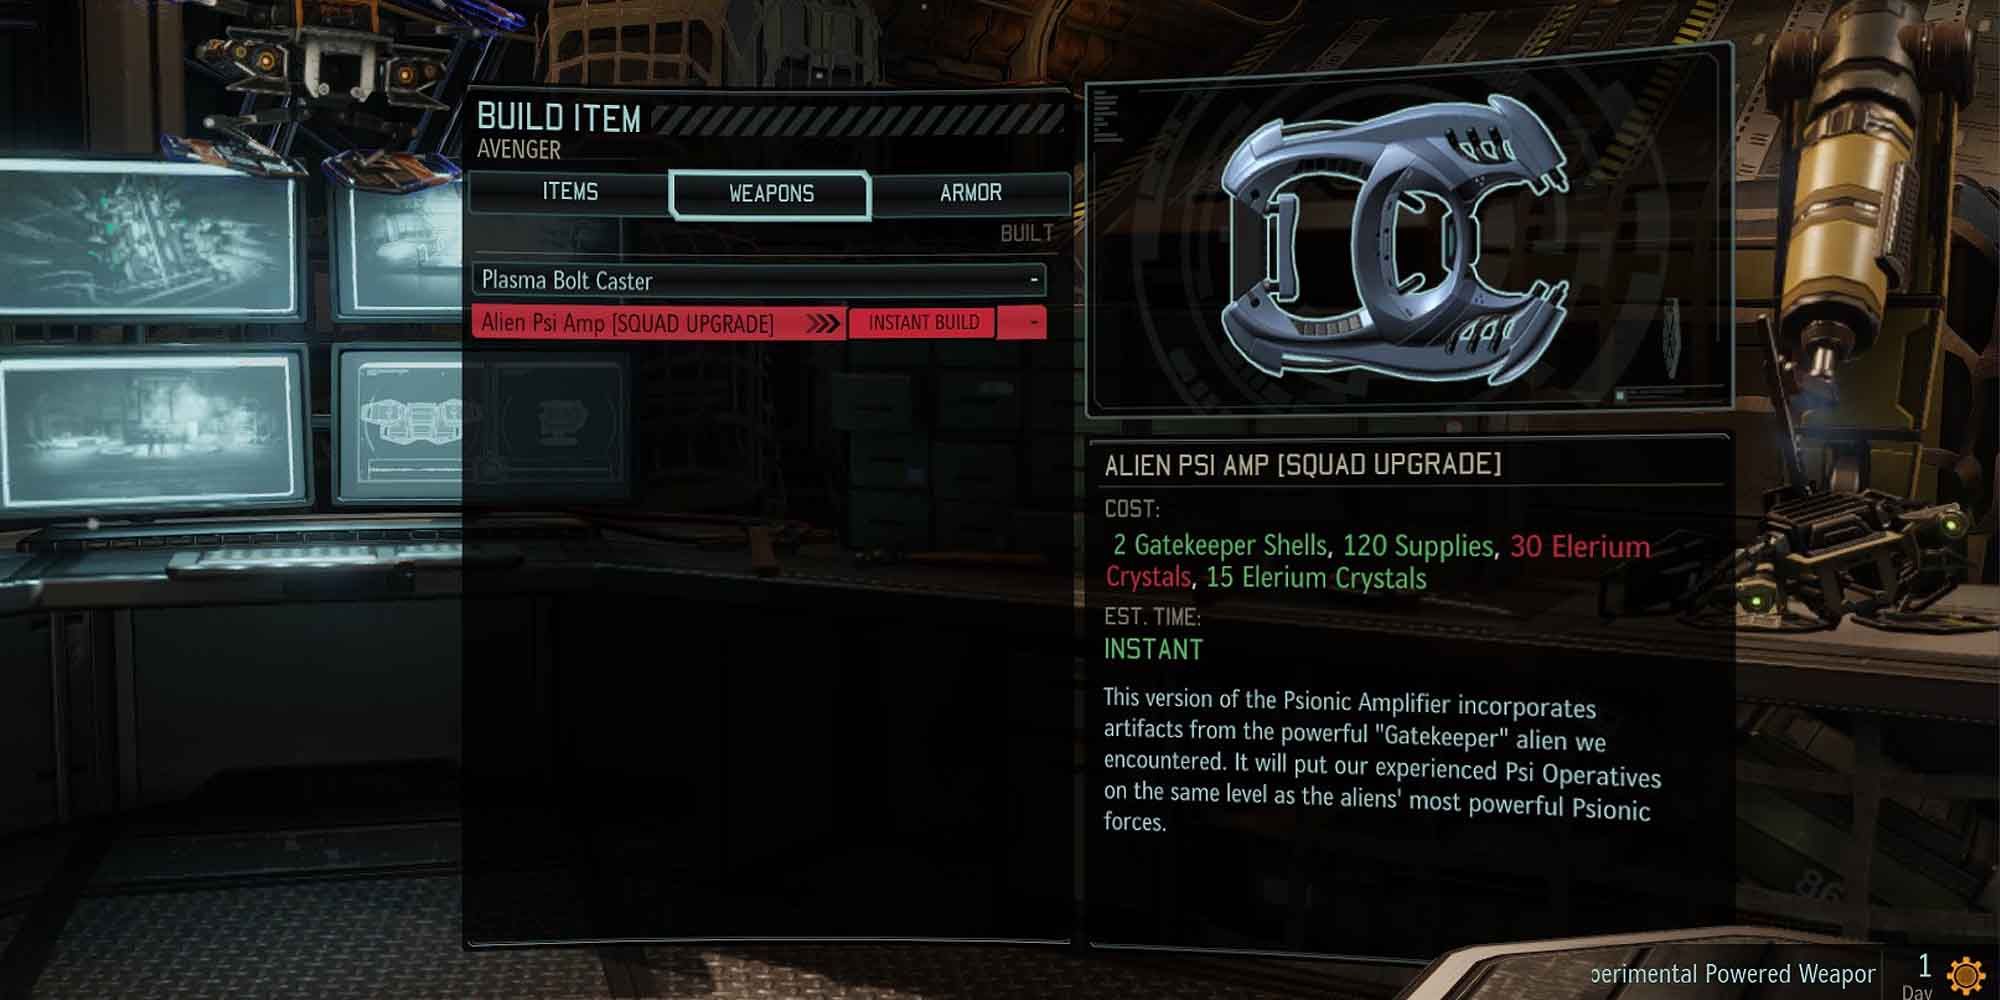 The information screen for the Alien Psi Amp in Xcom 2